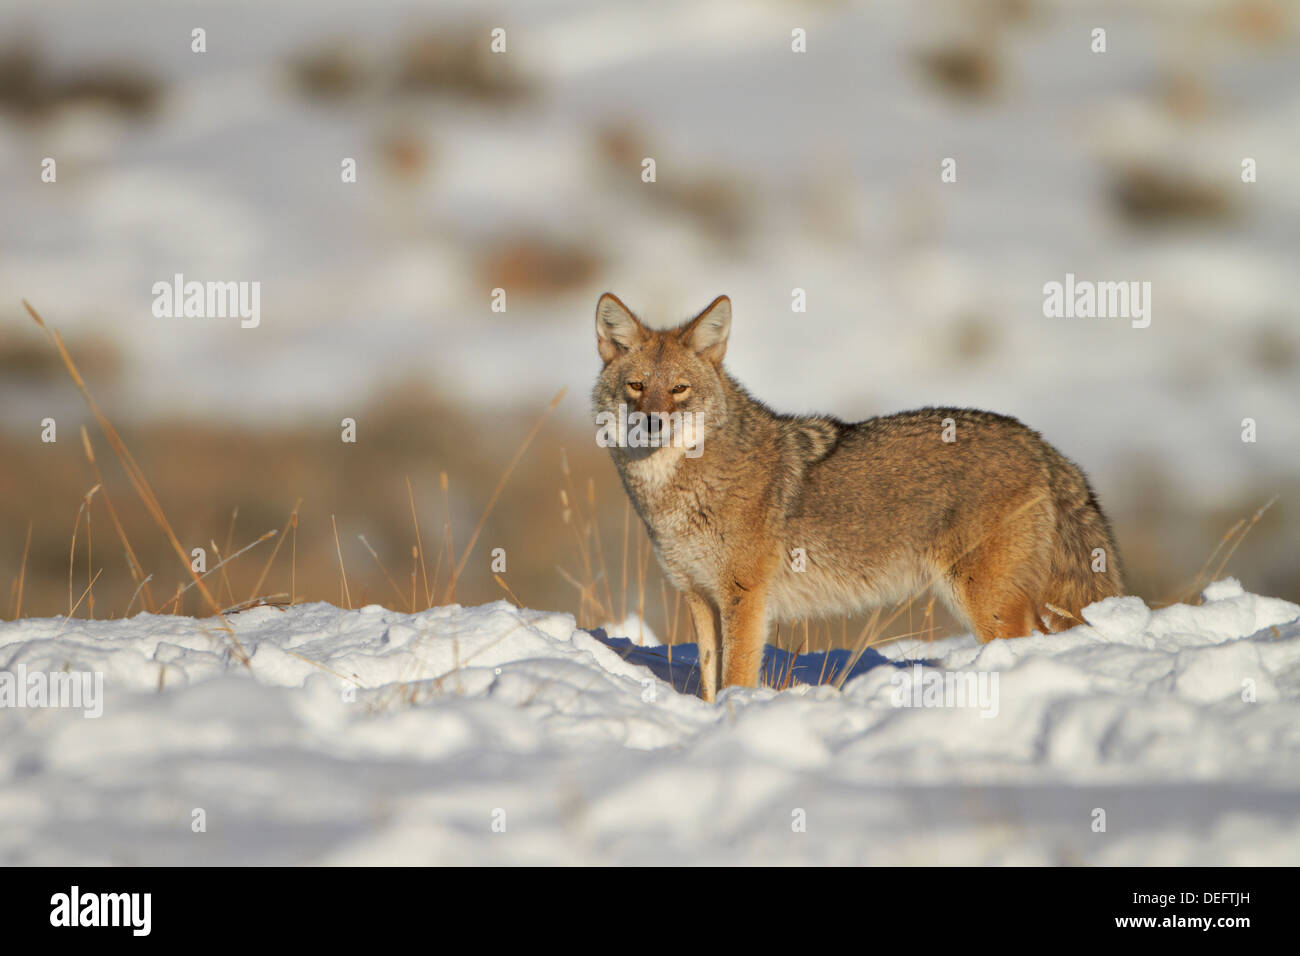 Coyote (Canis latrans) in the snow, Yellowstone National Park, Wyoming, United States of America, North America Stock Photo